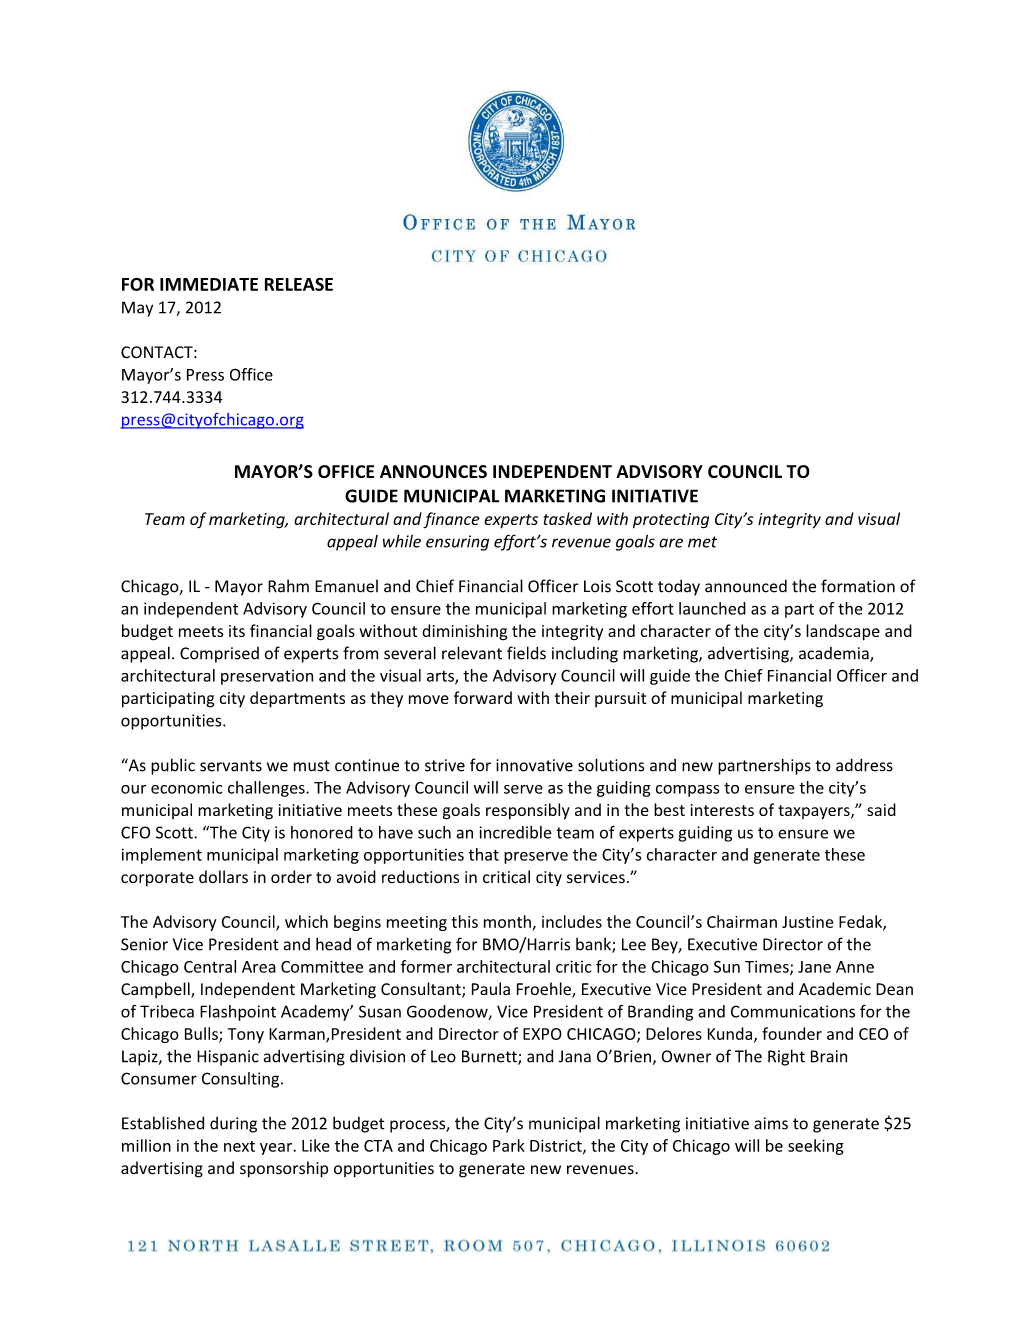 For Immediate Release Mayor's Office Announces